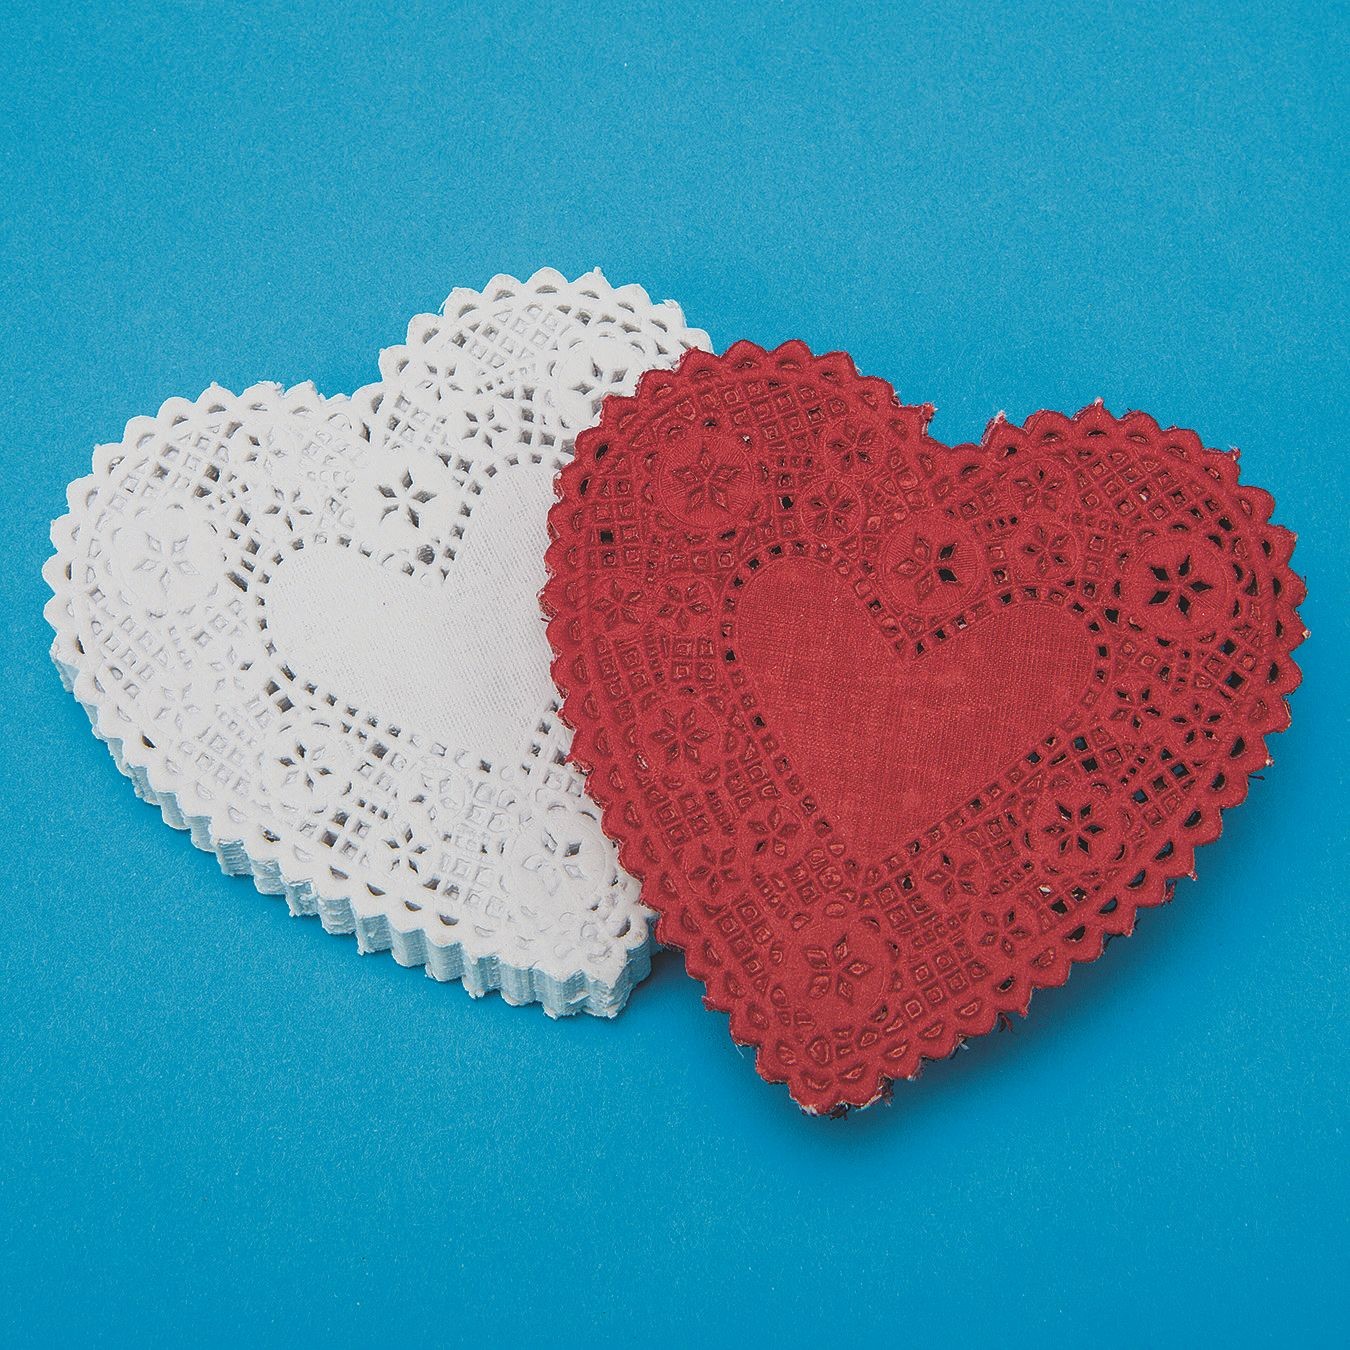 100x 4 Inch White Love Heart Paper Lace Doilies Doily For Cardmaking  Scrapbooking